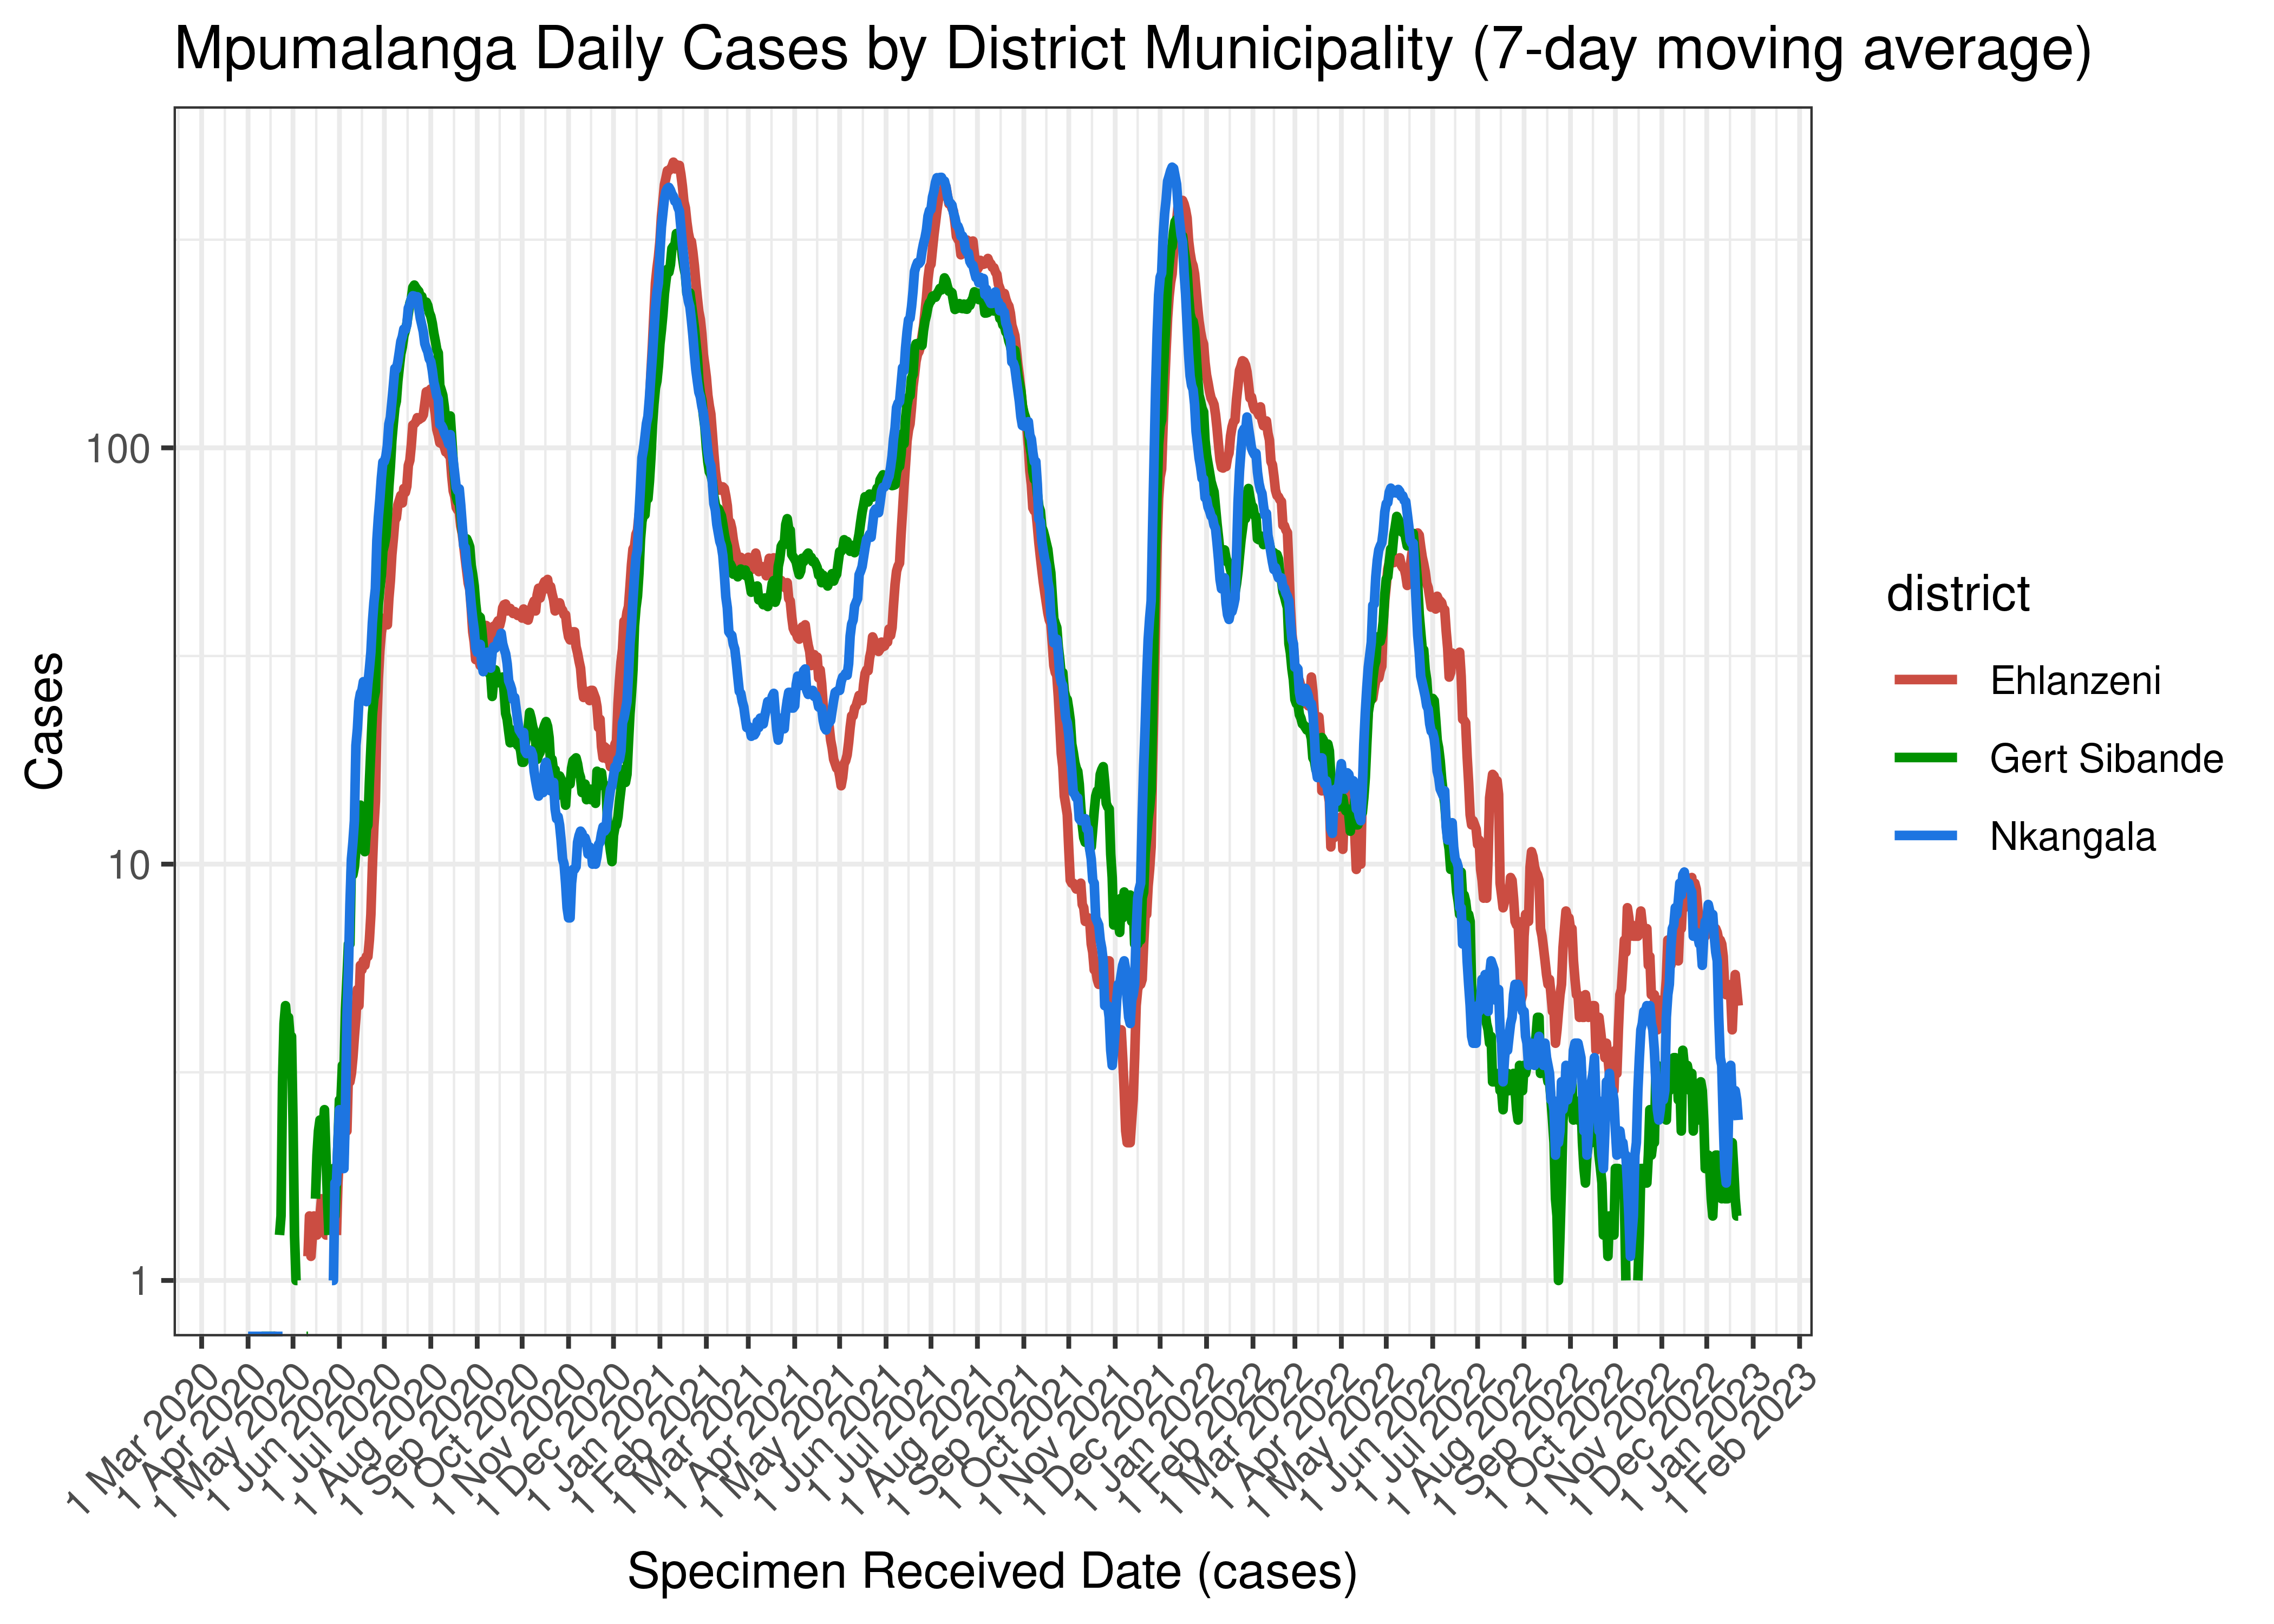 Mpumalanga Daily Cases by District Municipality (7-day moving average)